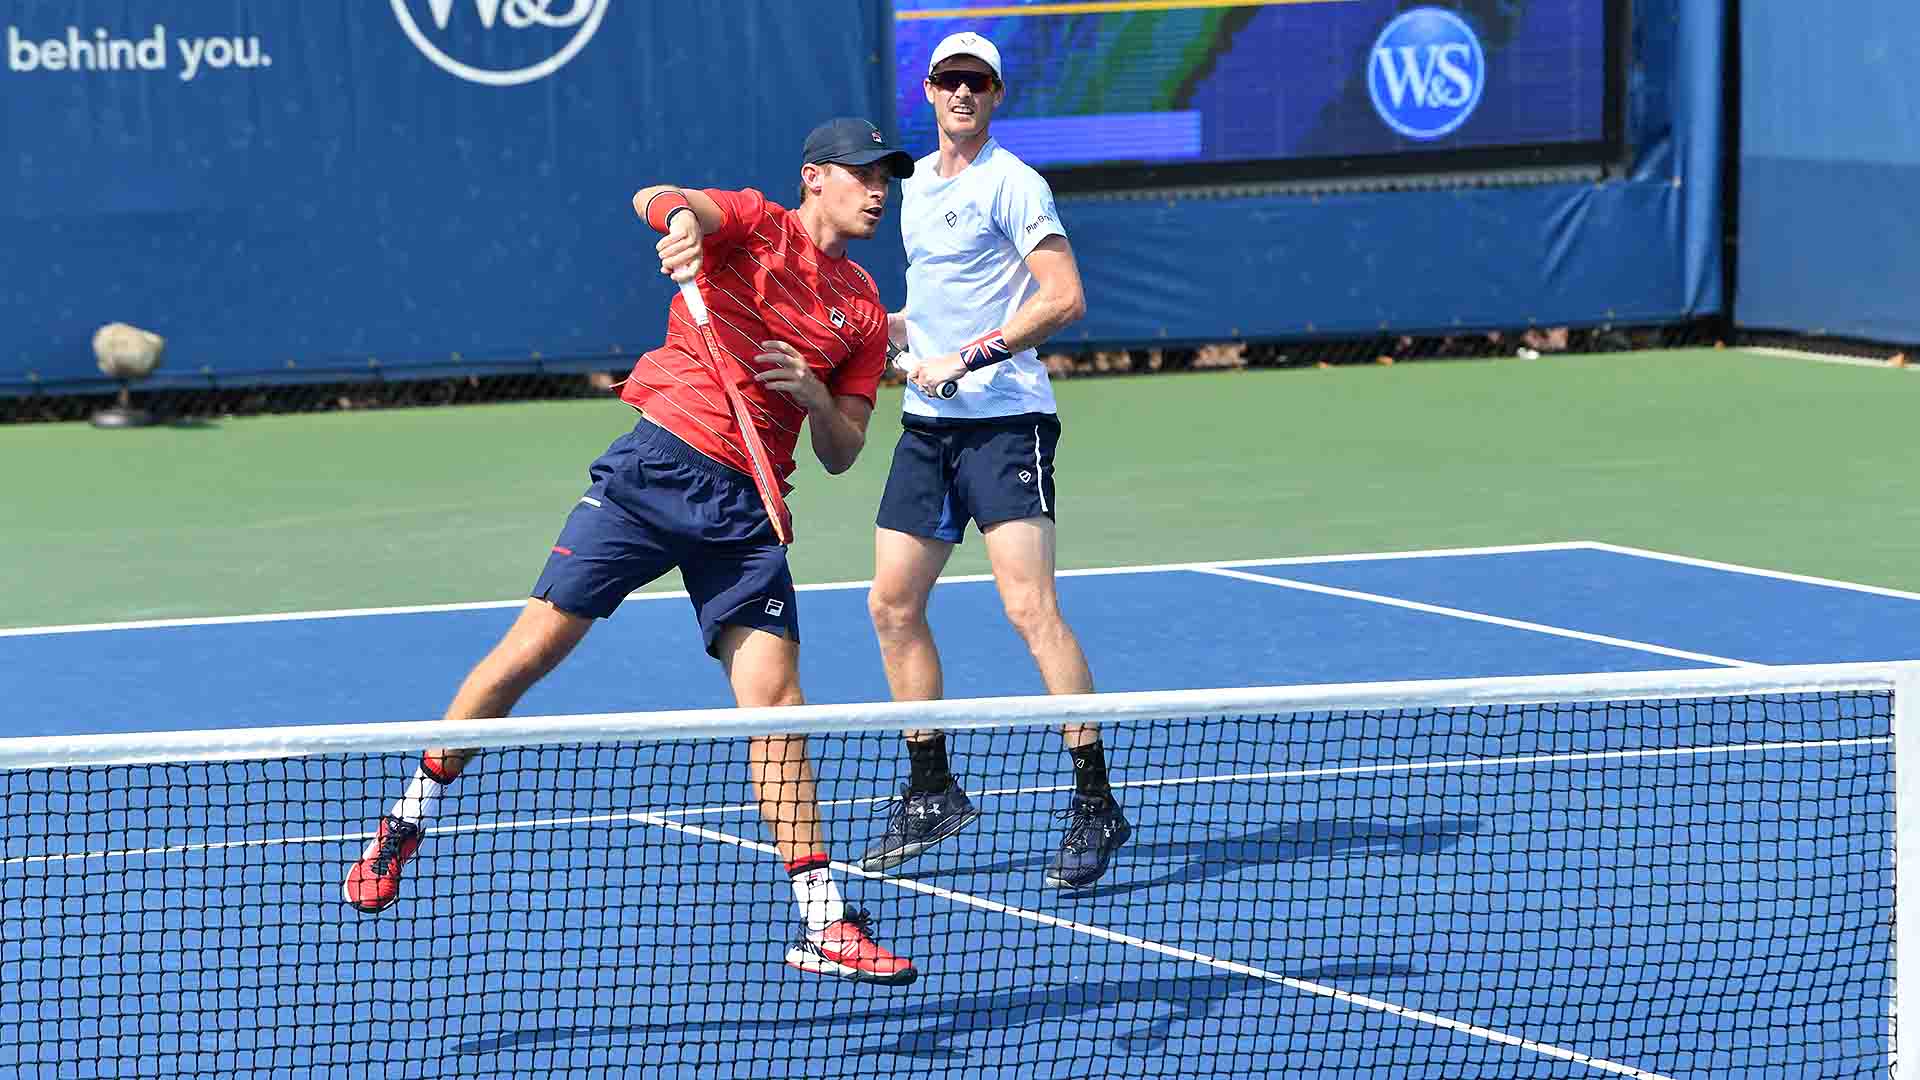 Neal Skupski and Jamie Murray are seeking their first title as a team.